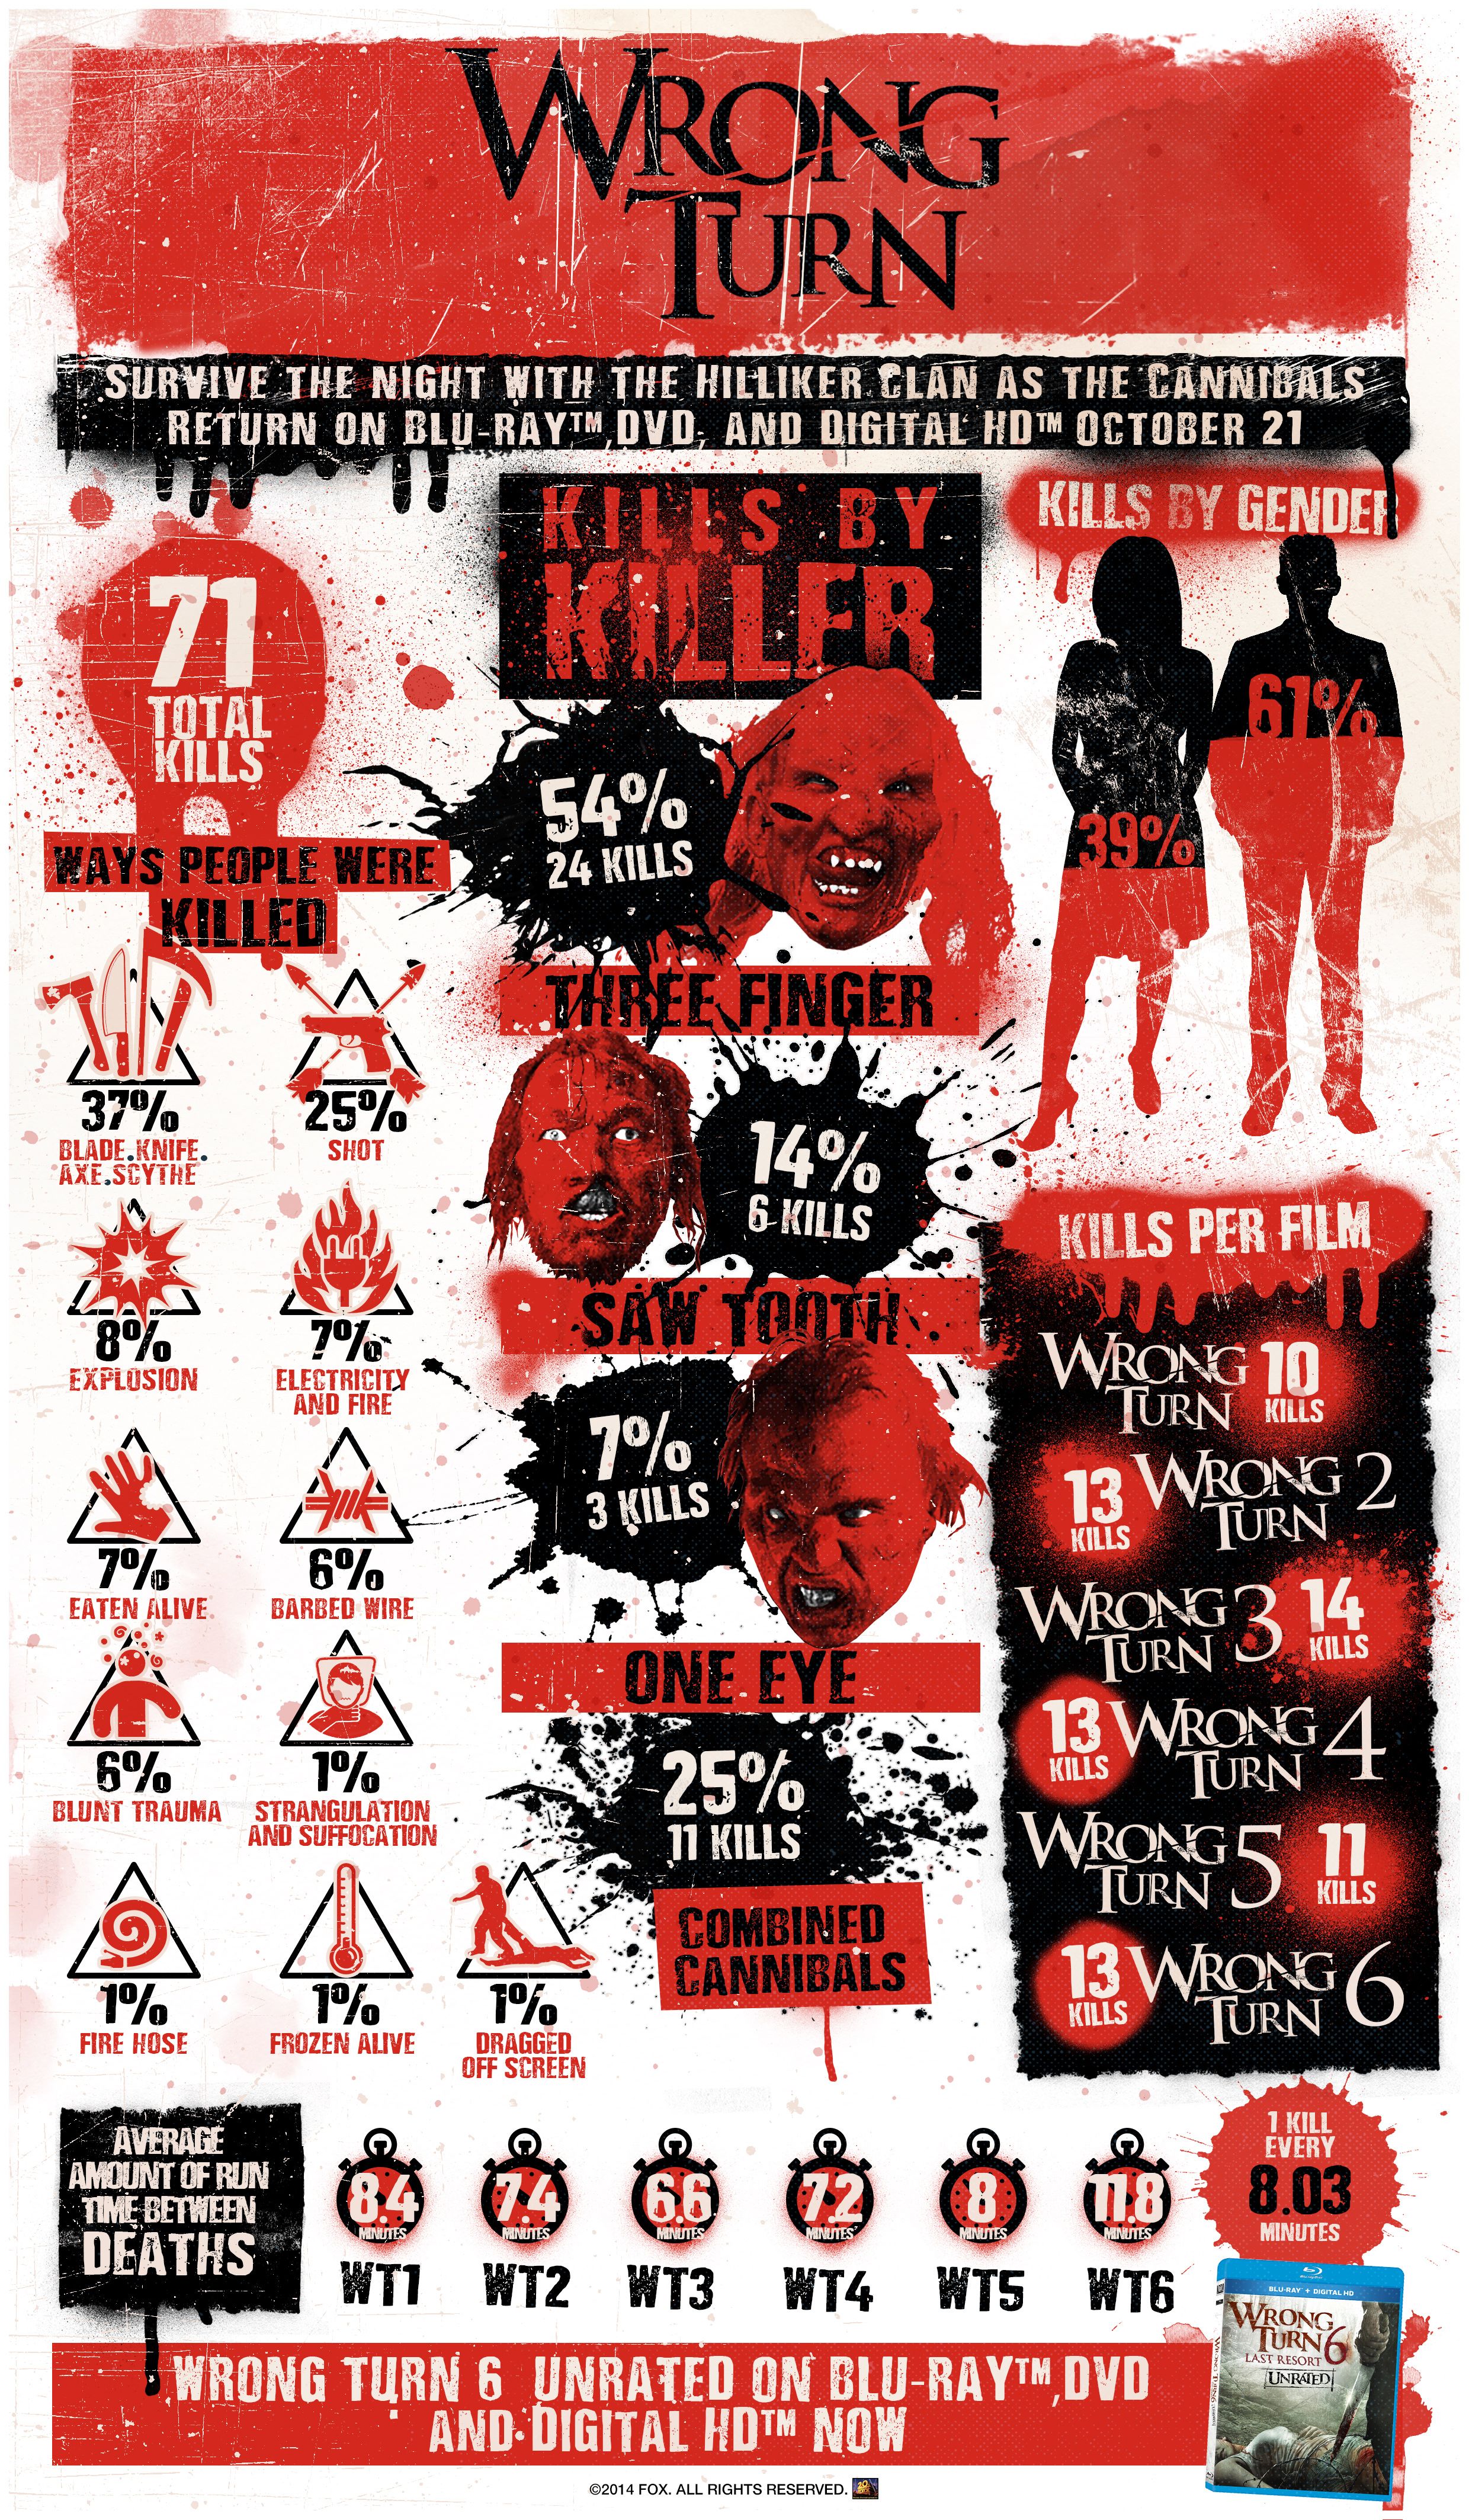 Wrong Turn 6 info graphic